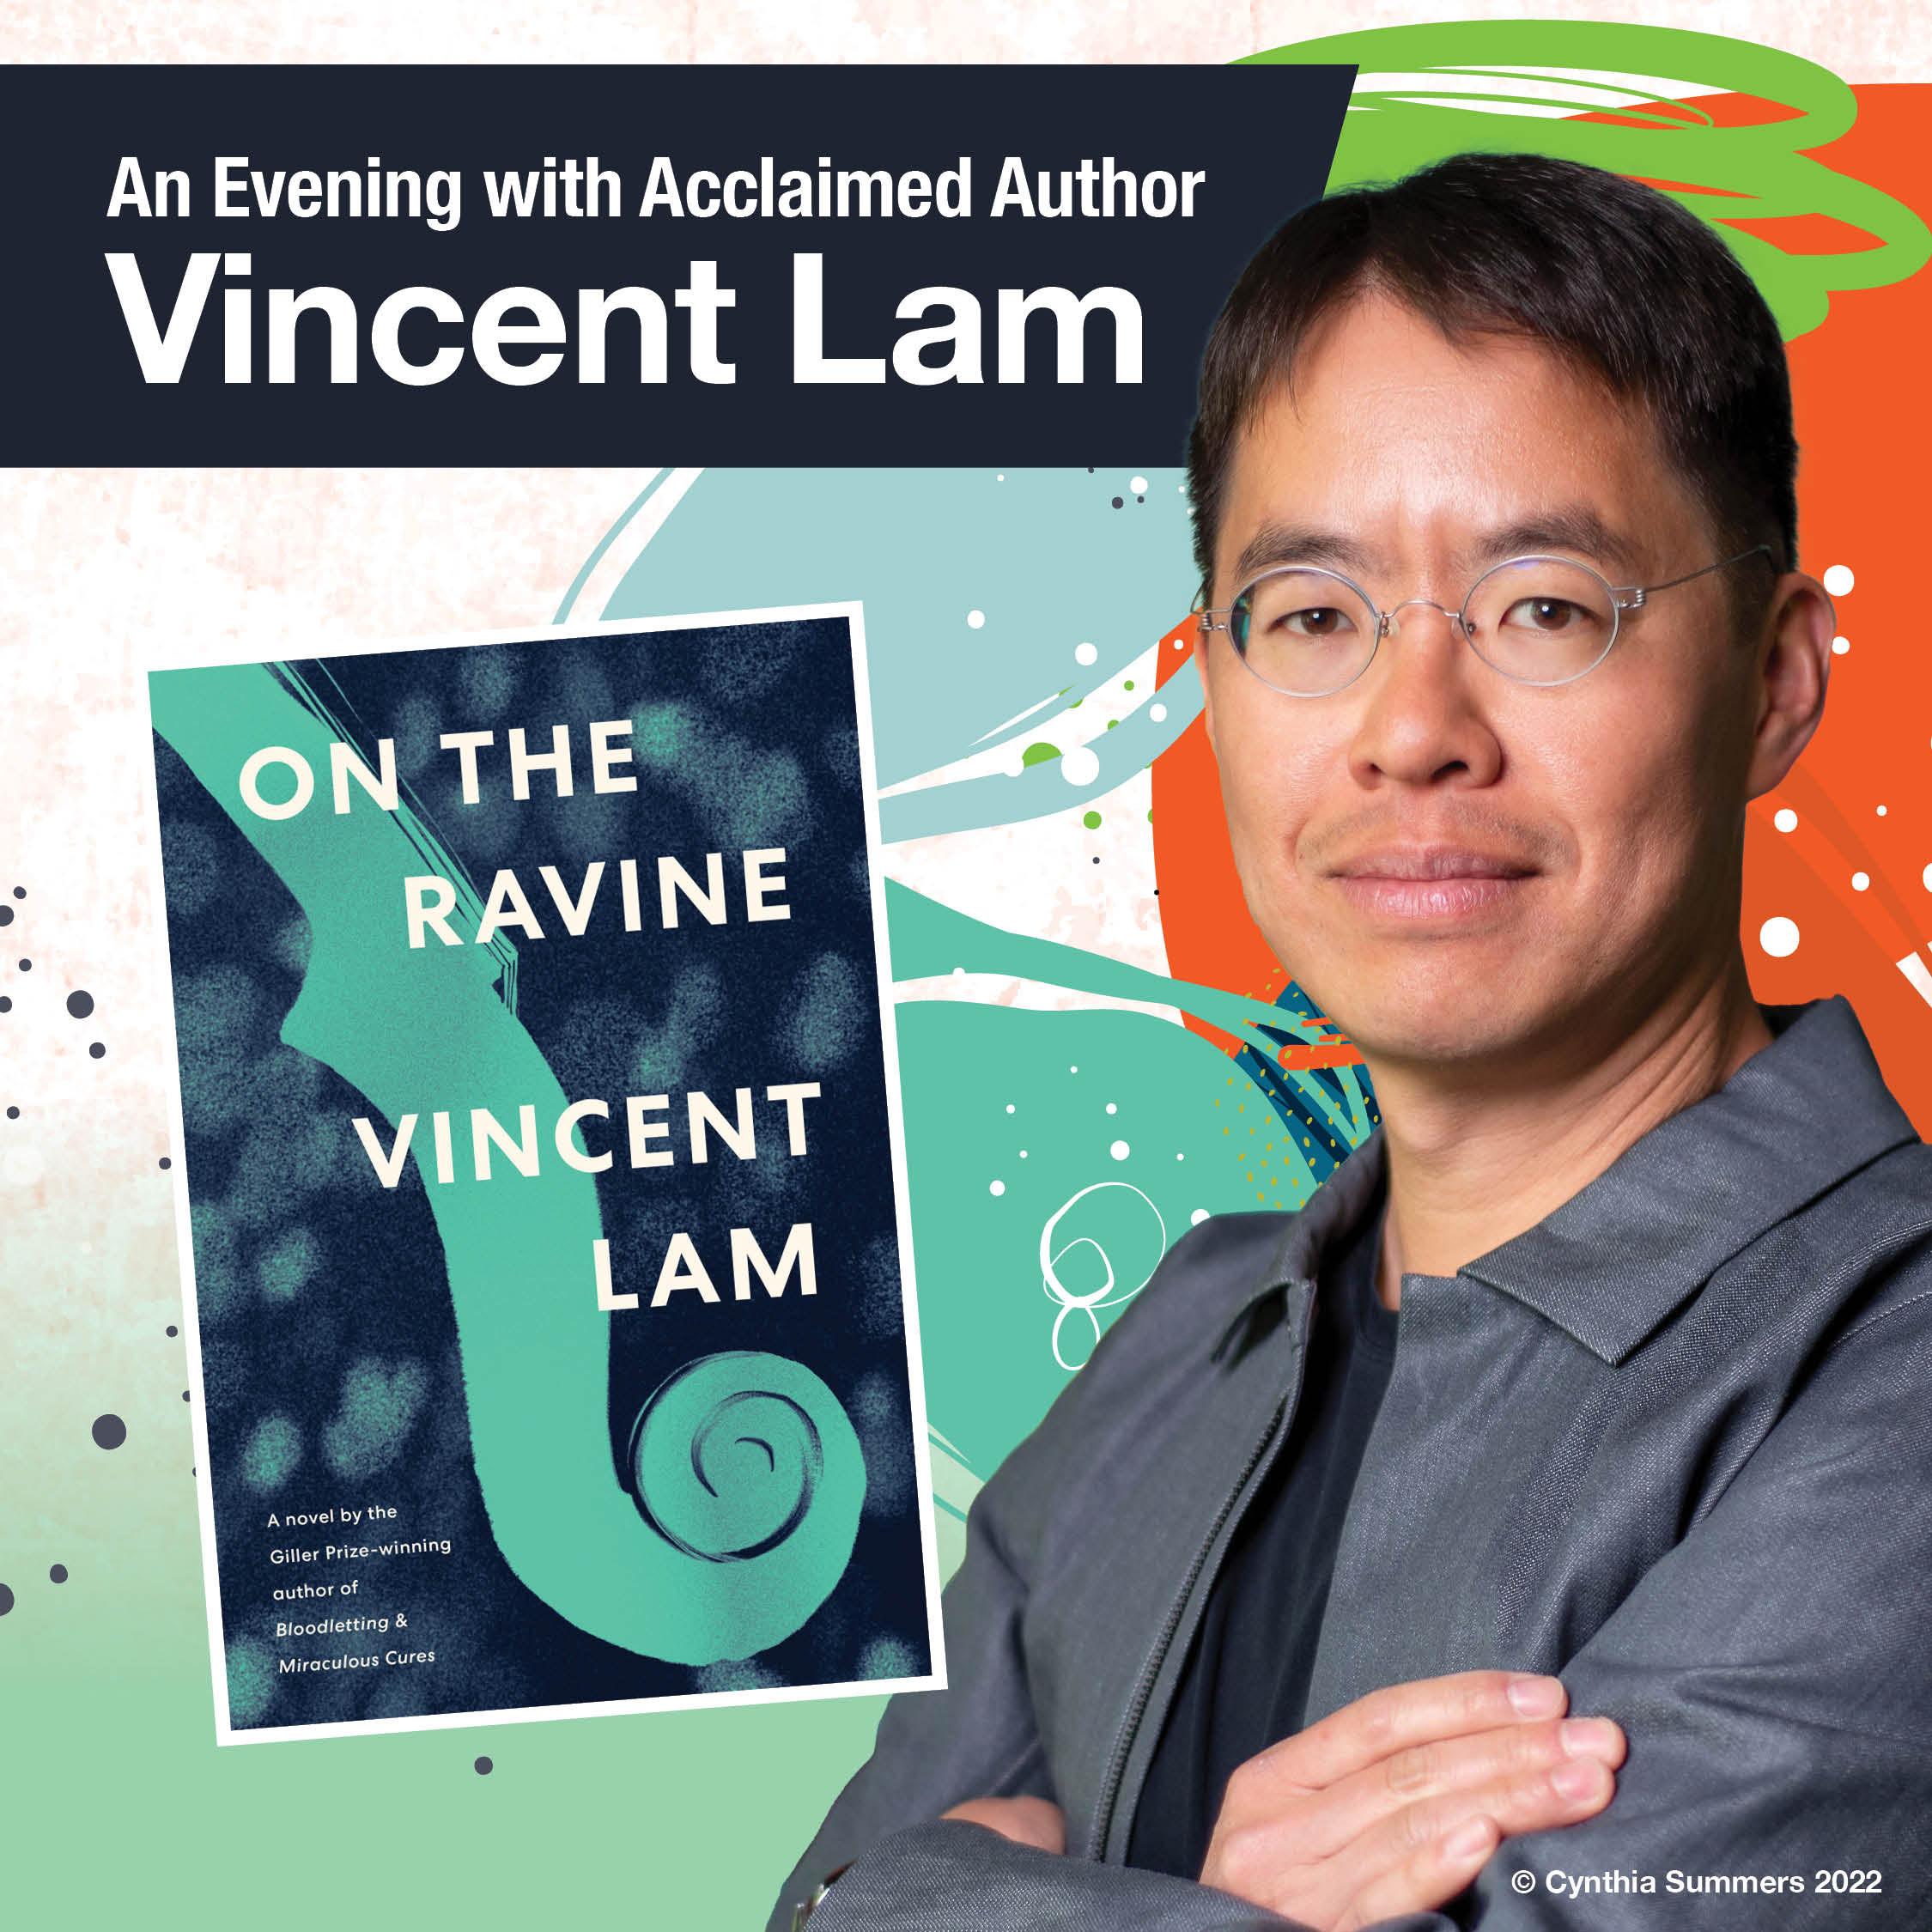 Author Vincent Lam posing with his book On the Ravine